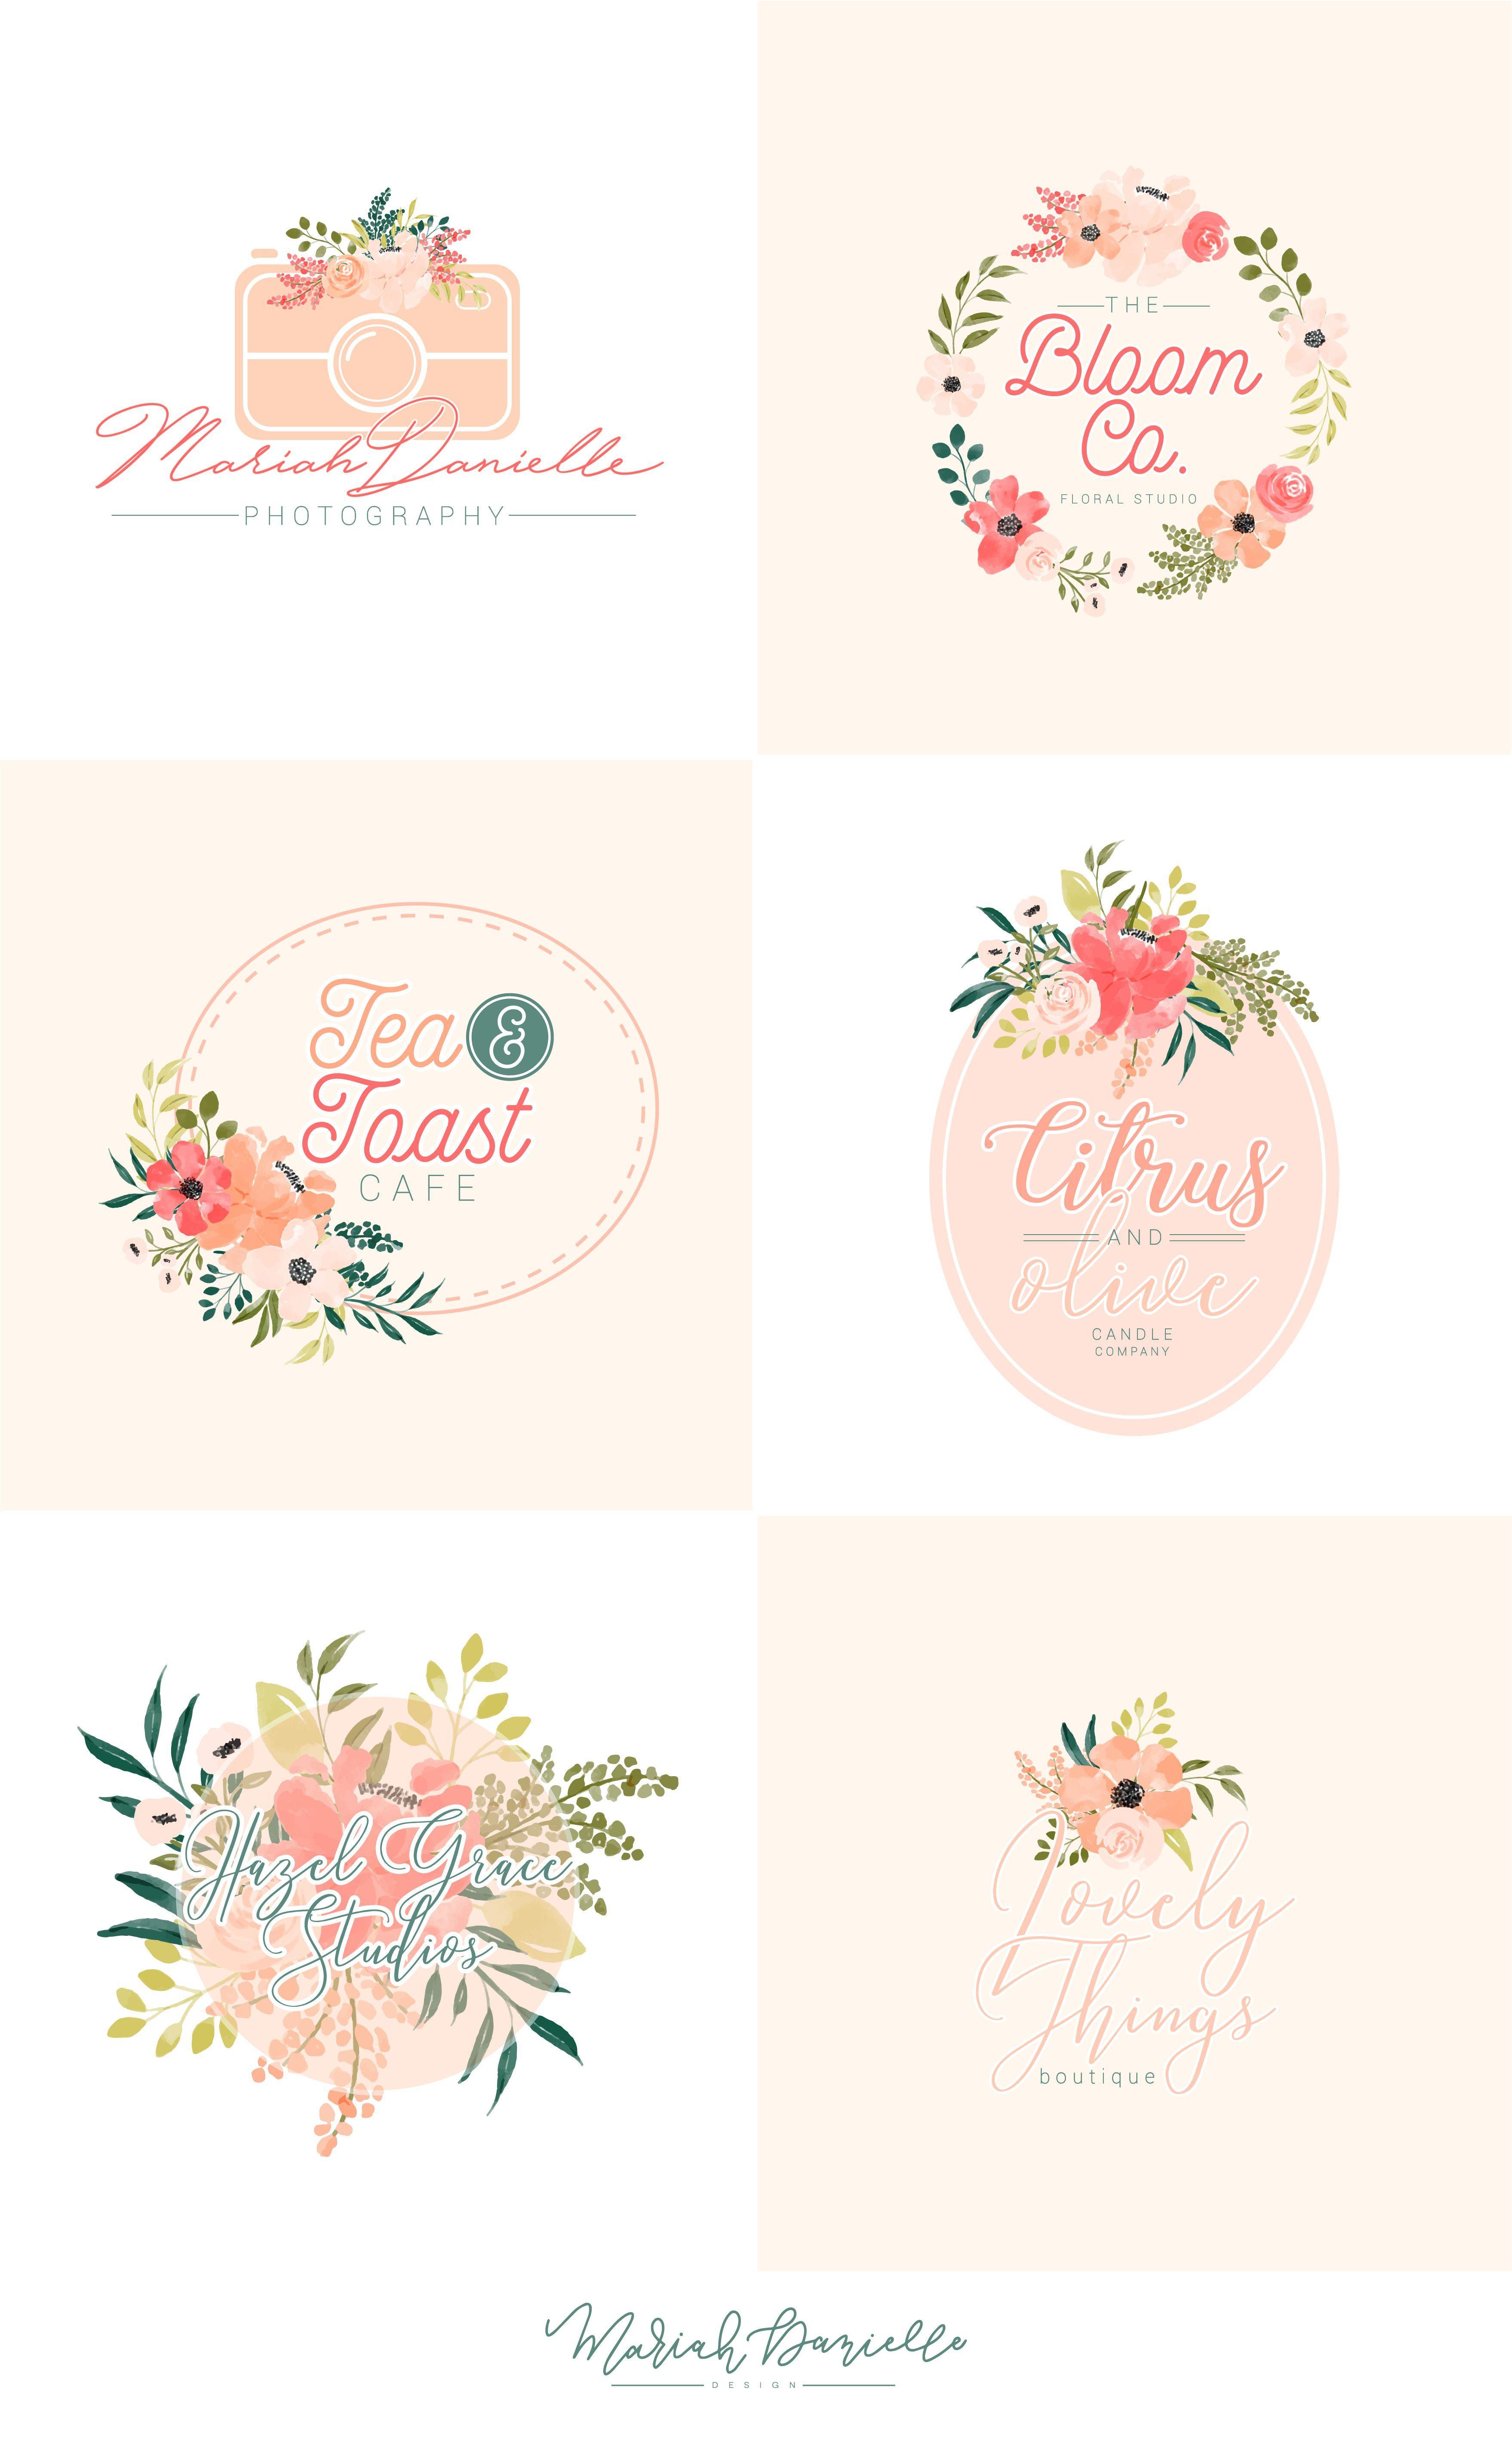 Red and Peach Logo - Peach & Posey Floral Premade Logos. Hand Drawn